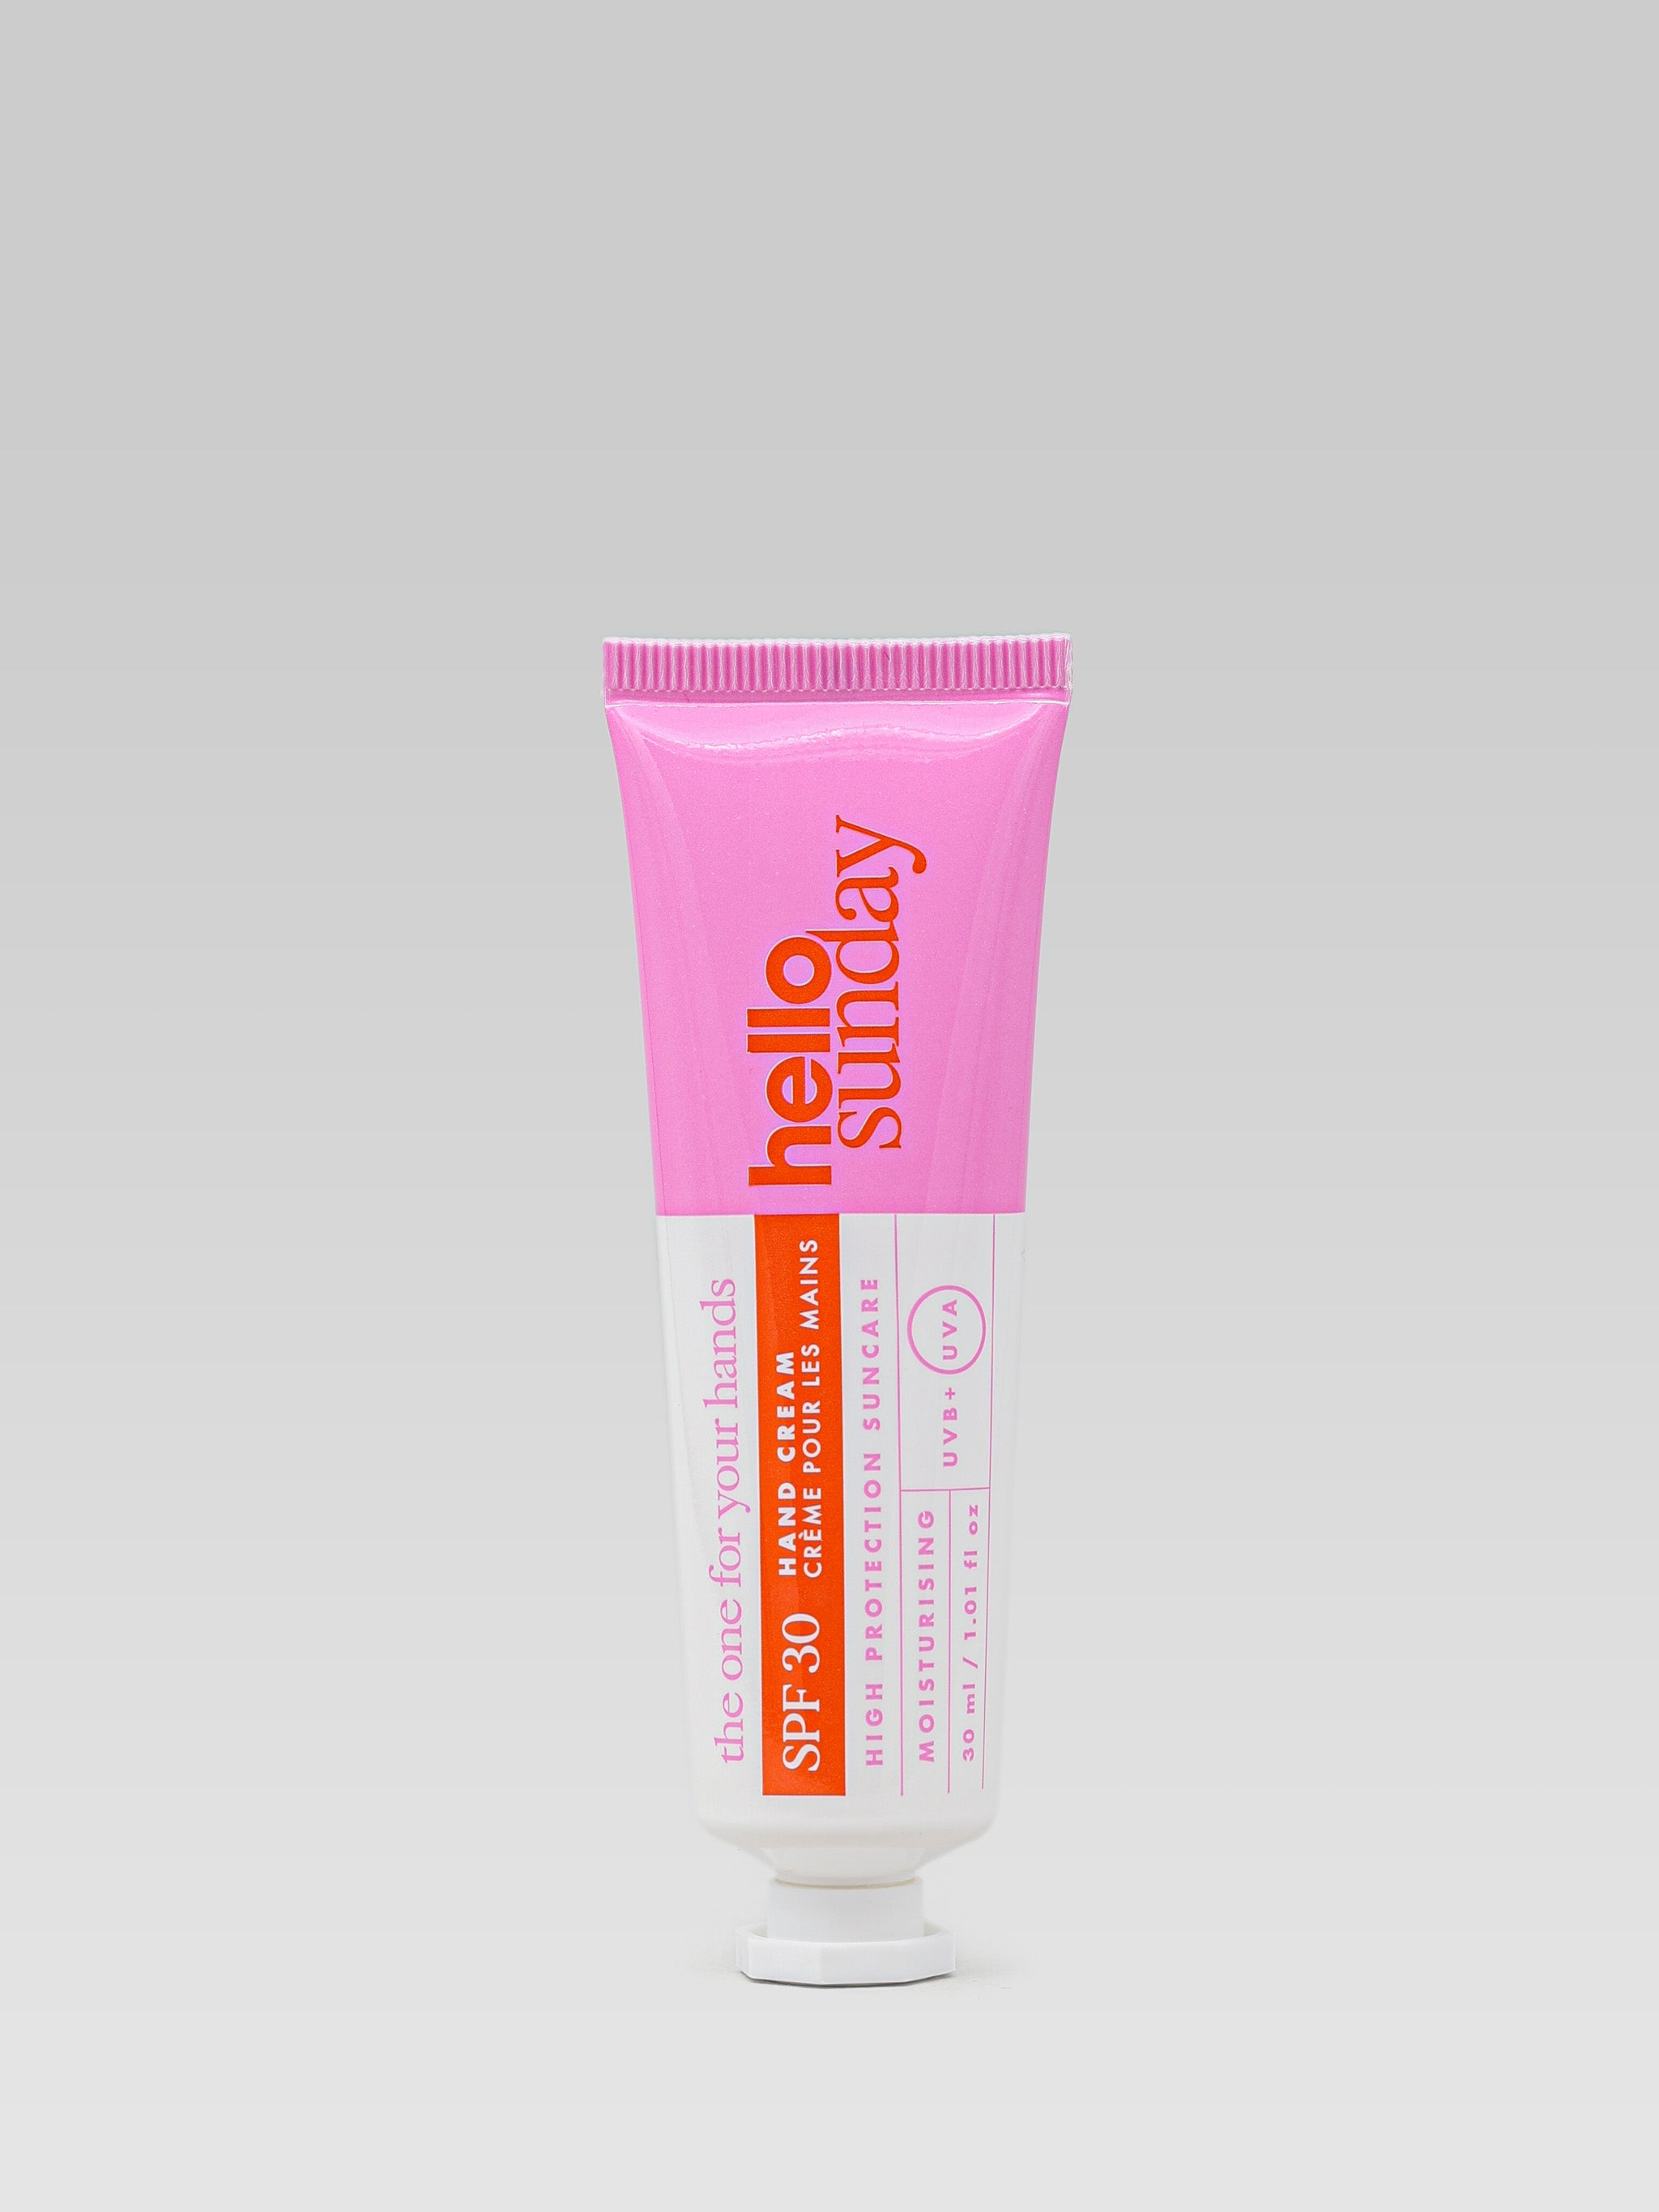 HELLO SUNDAY The One For Your Hands Hand Cream SPF 30 product shot